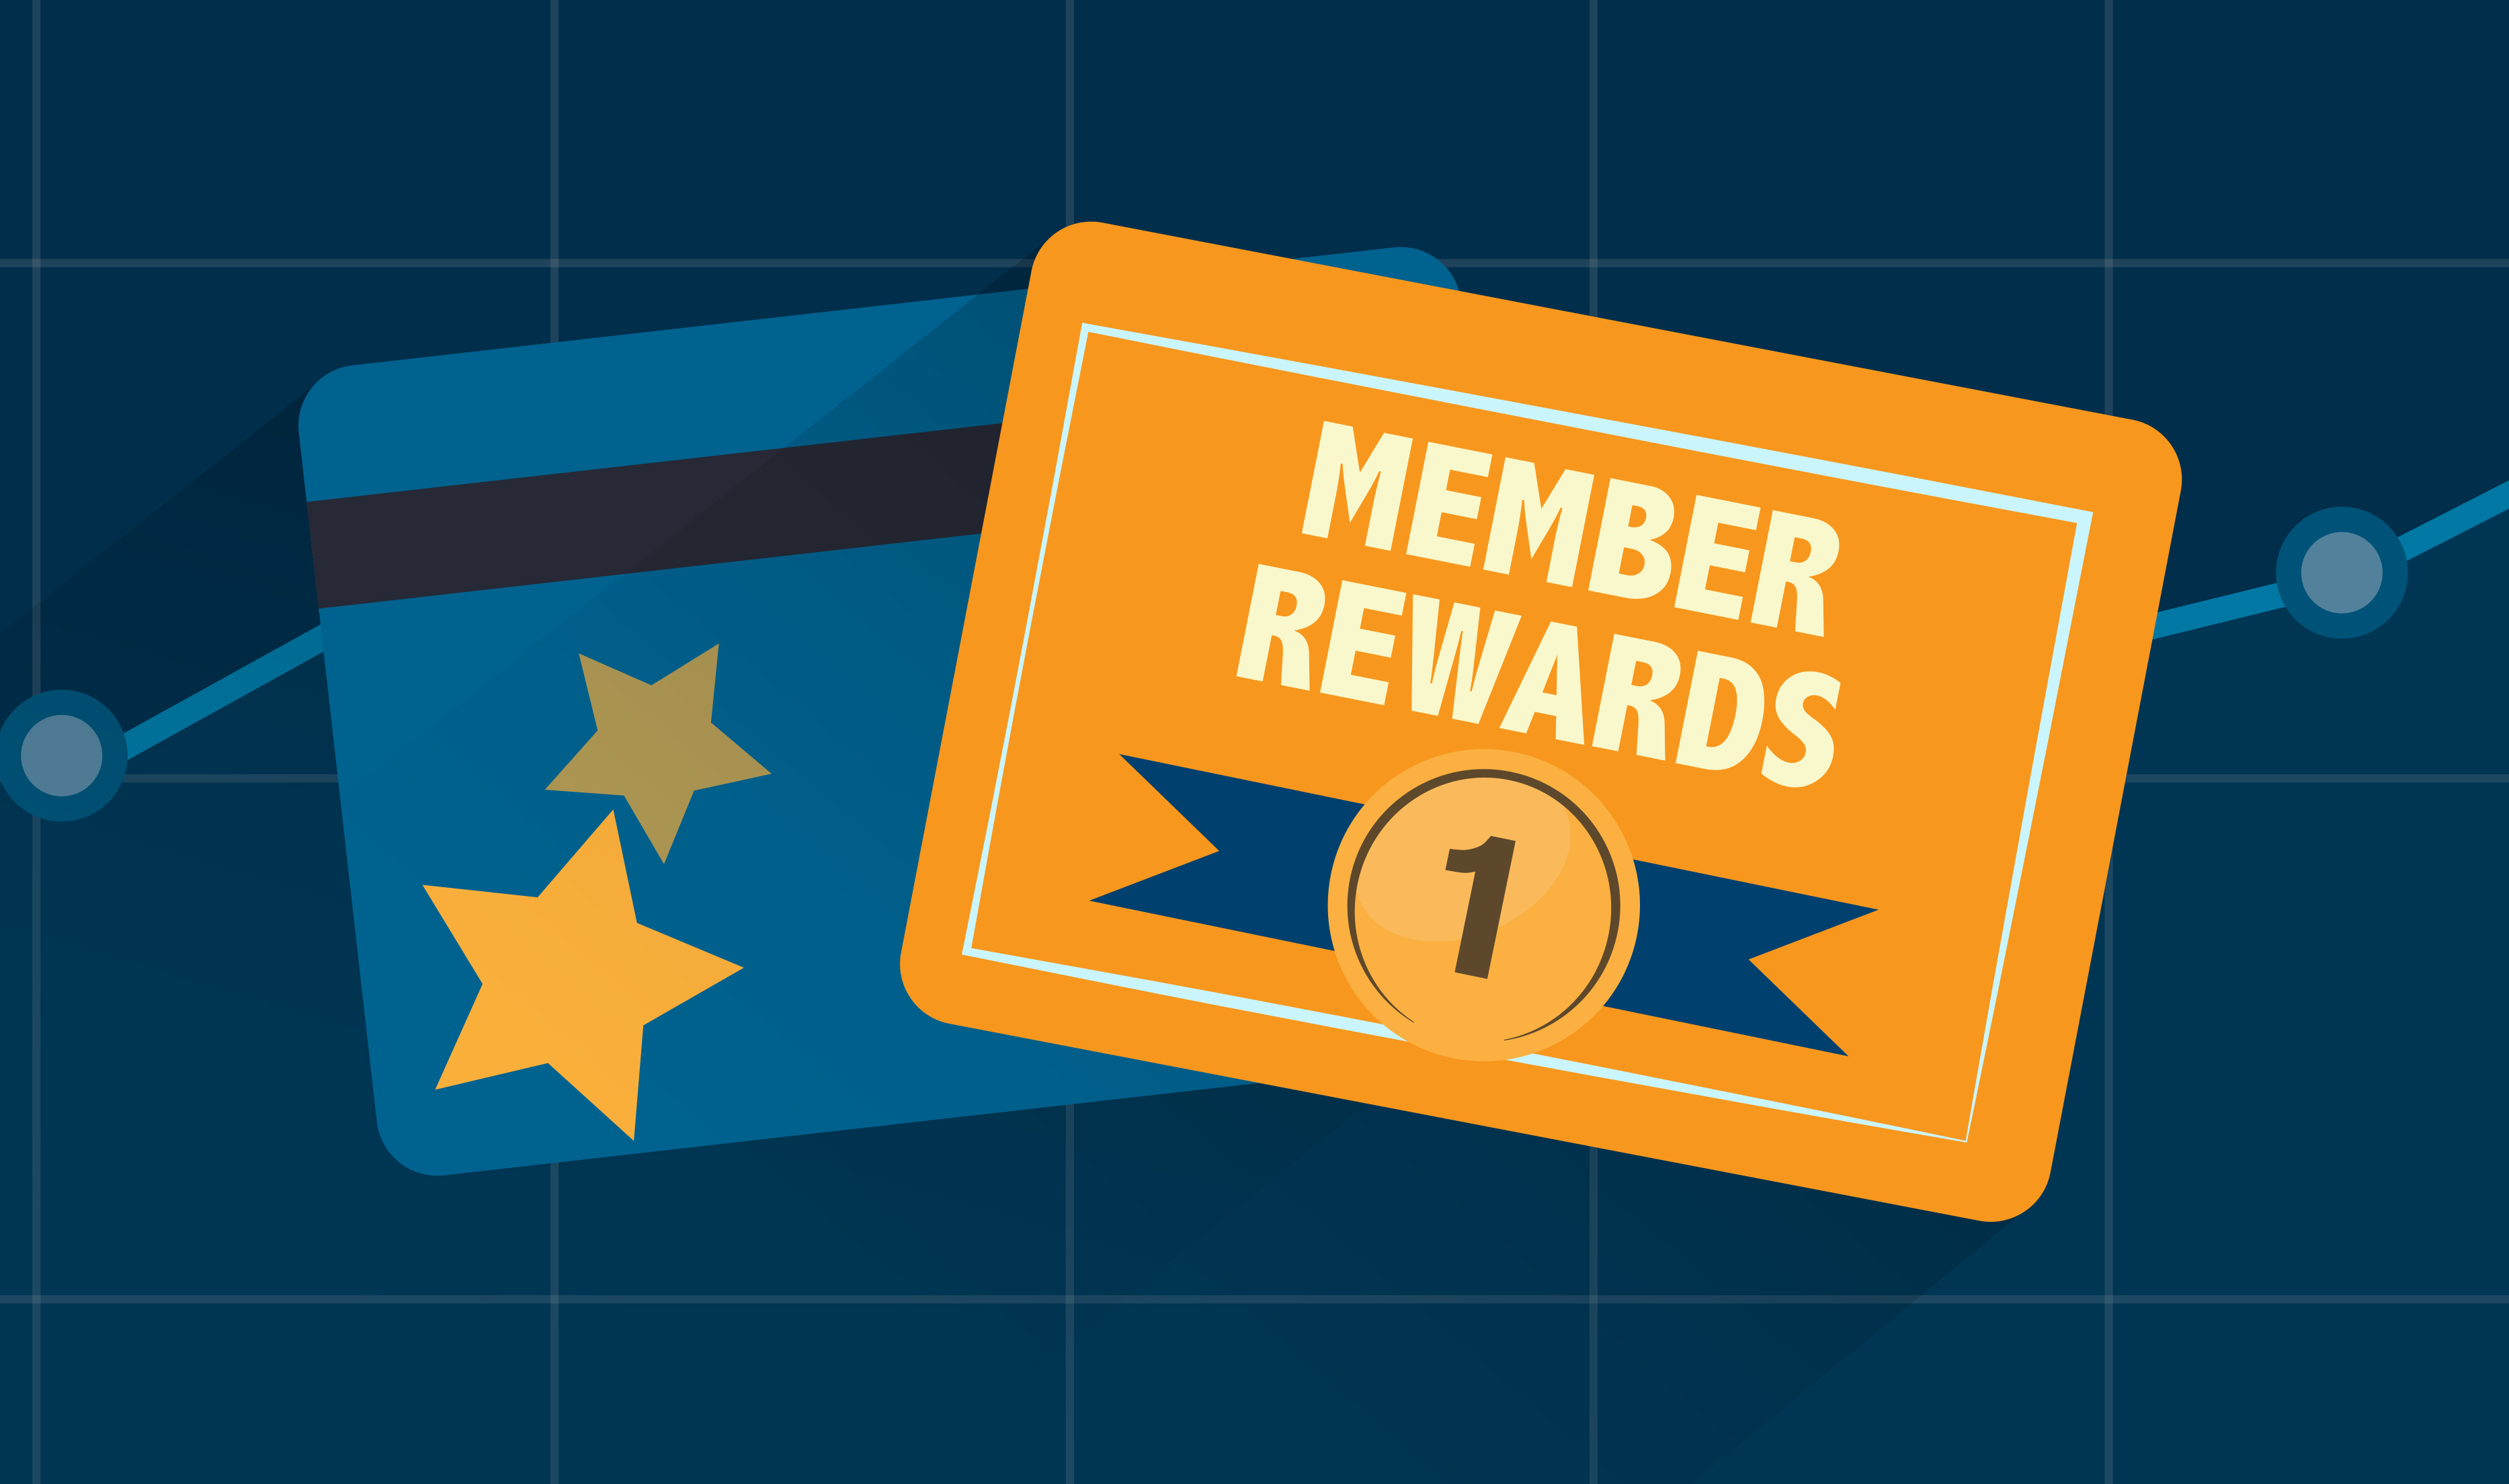 The paid loyalty program